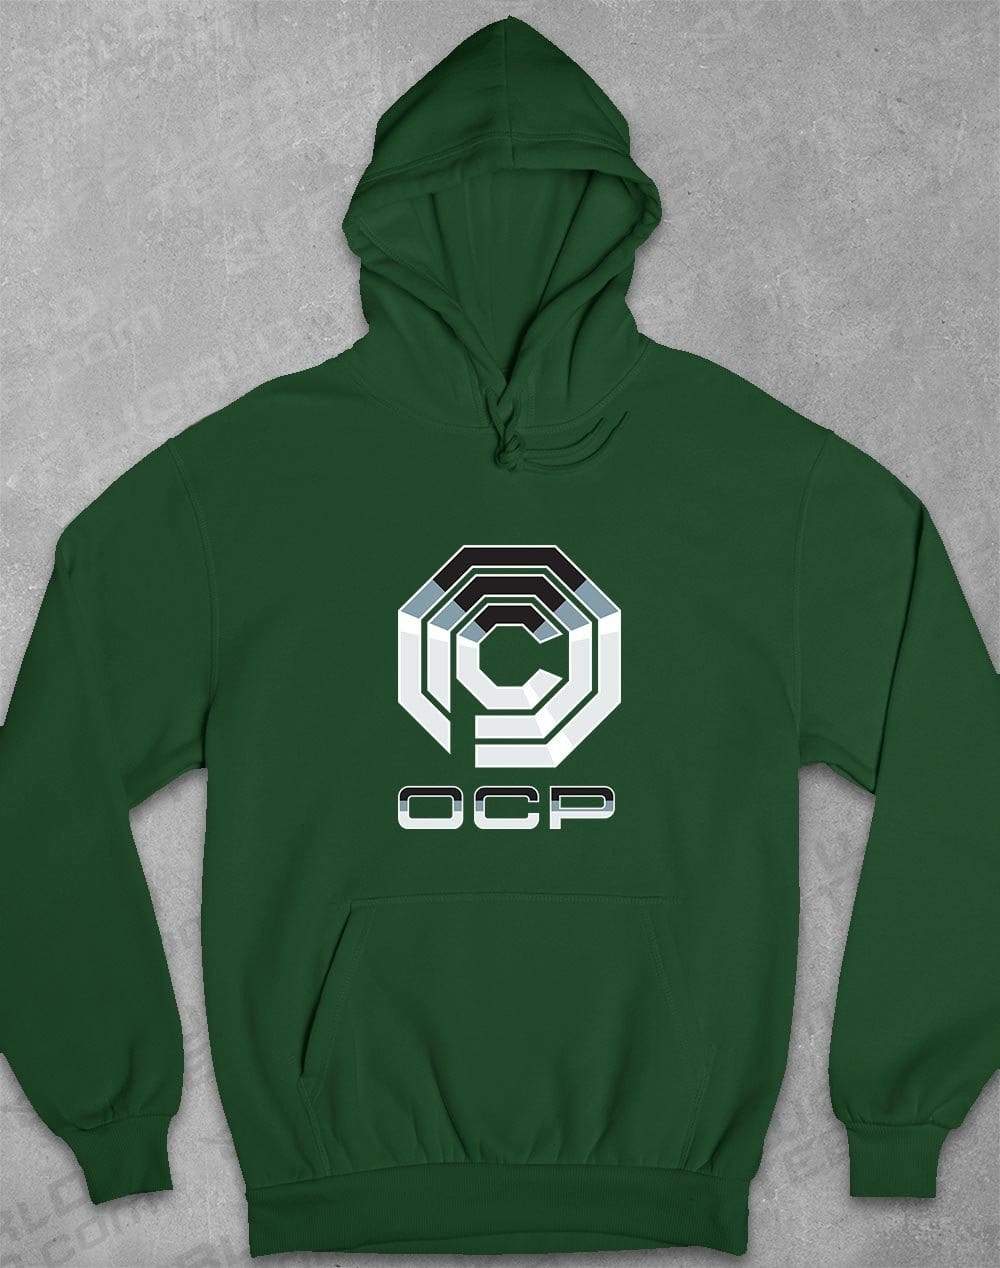 Omni Consumer Products Hoodie XS / Bottle Green  - Off World Tees